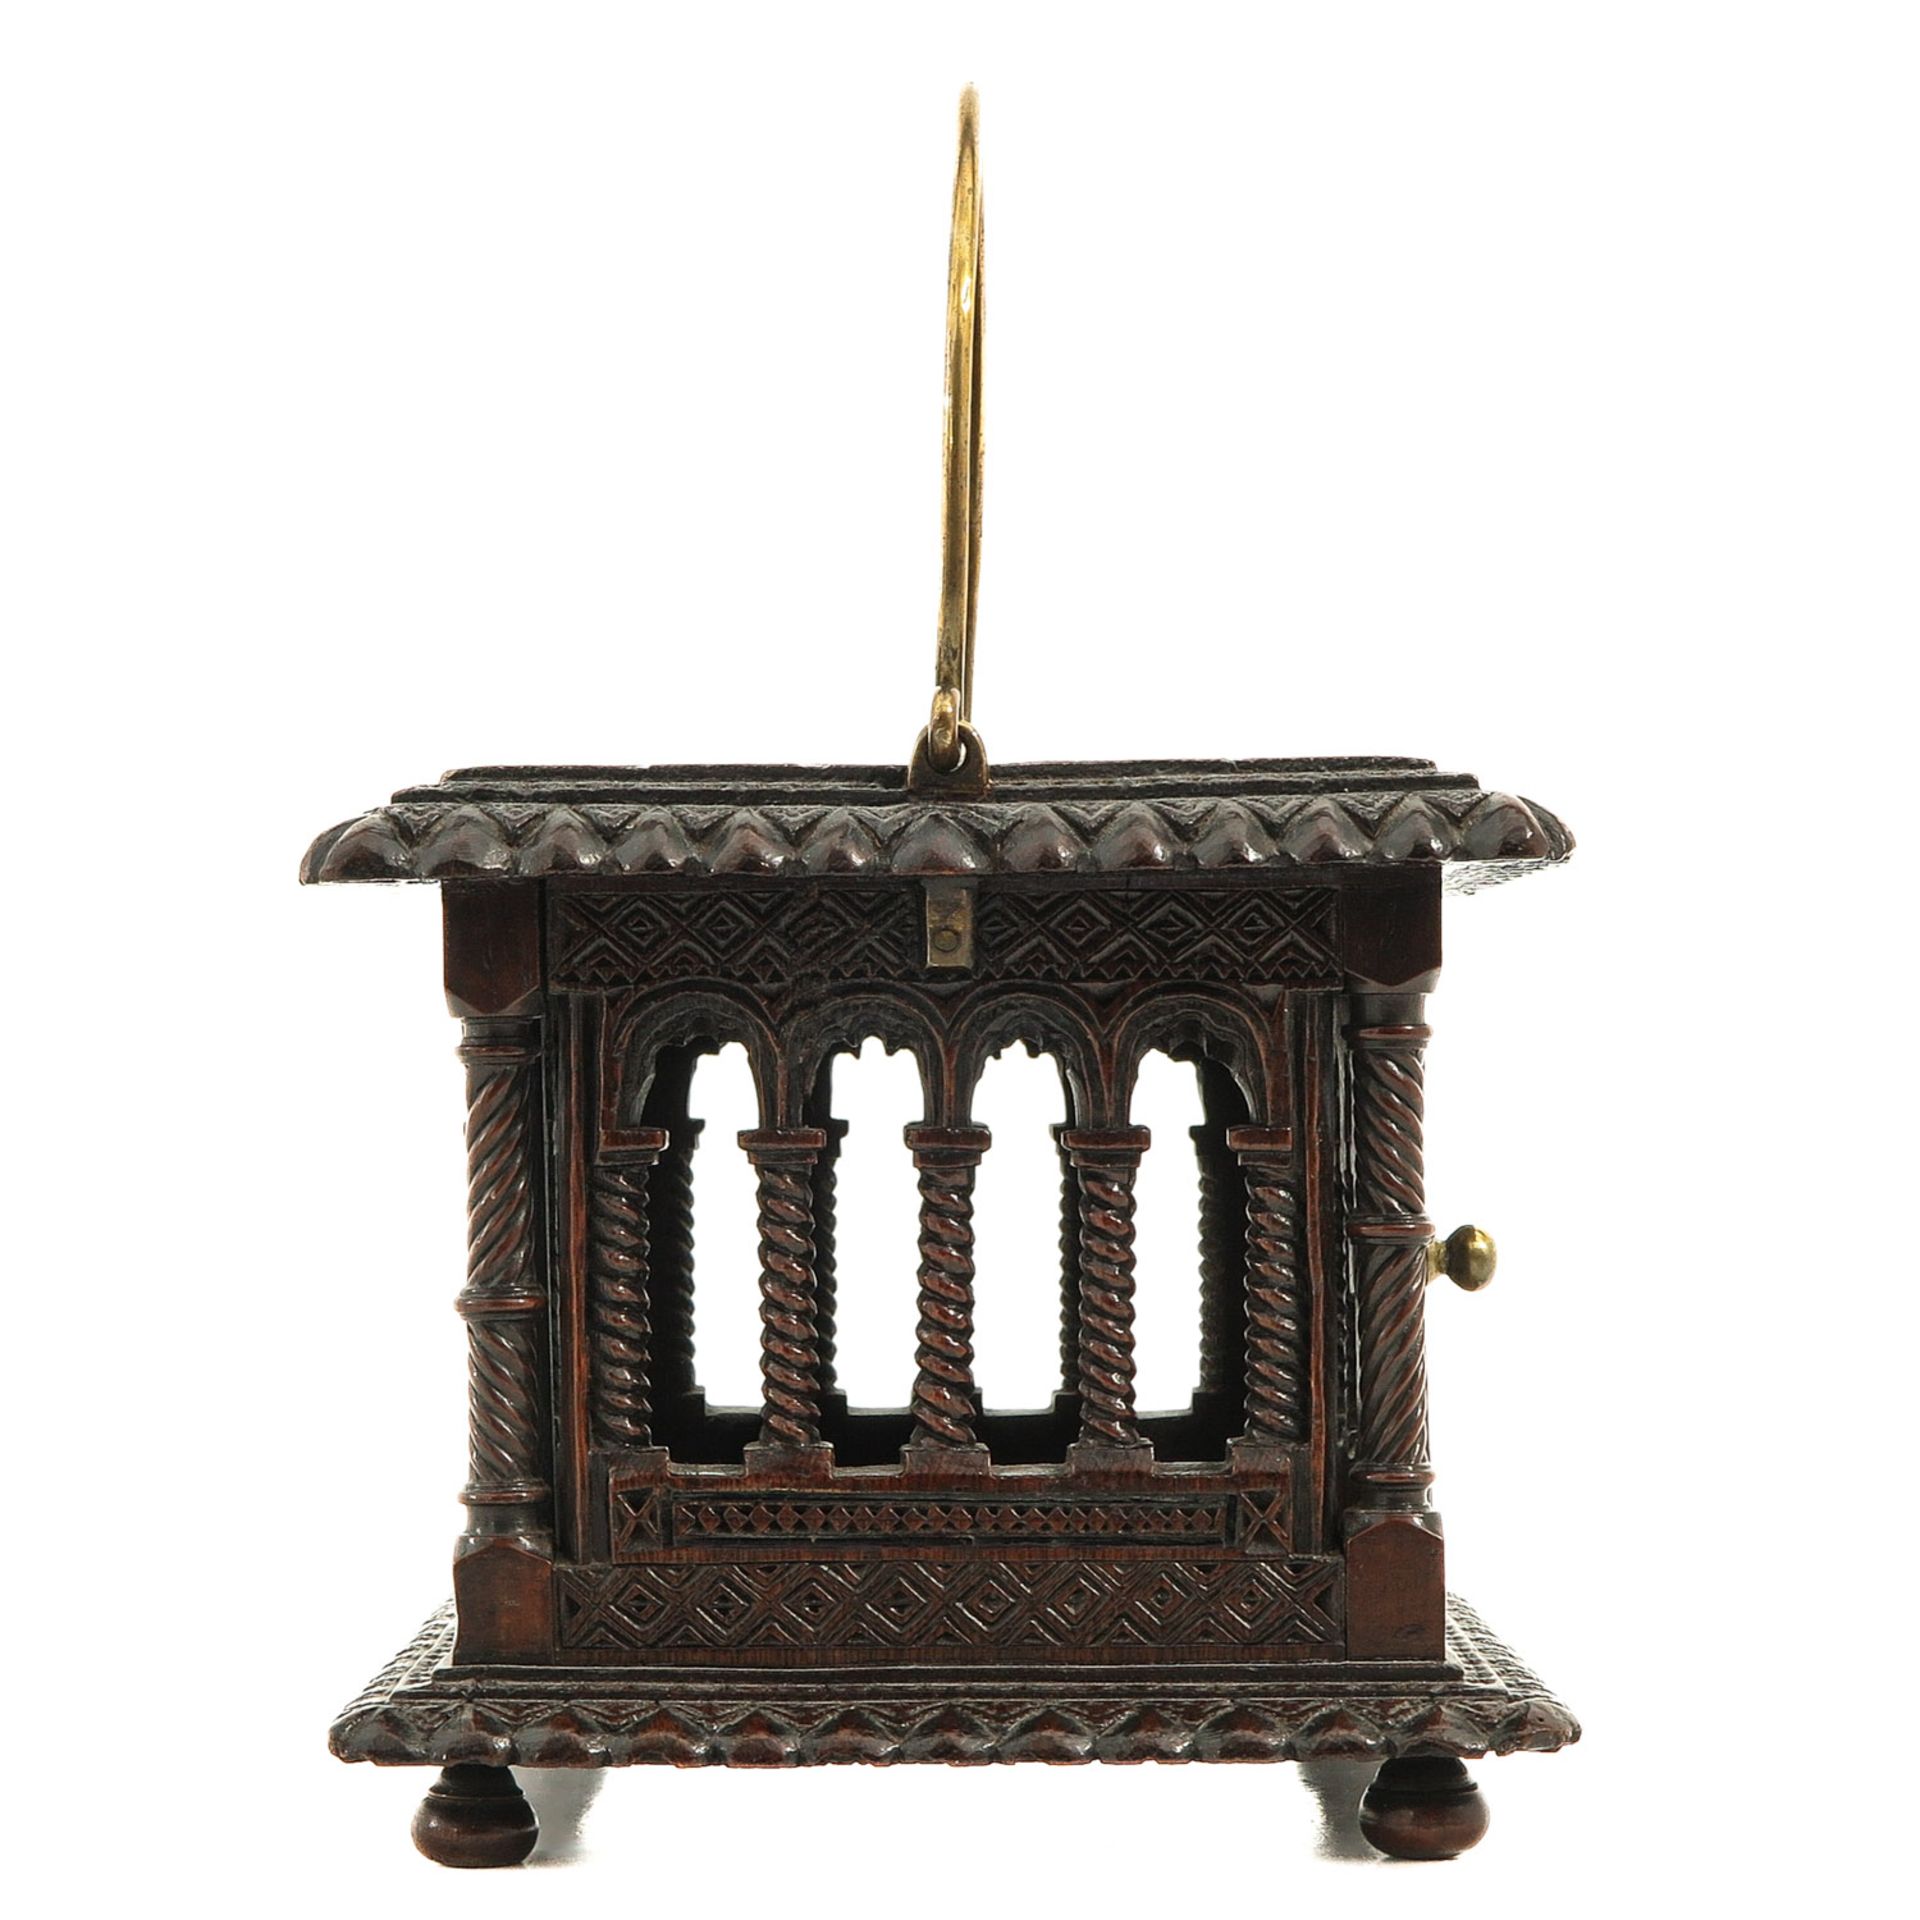 A Carved Wood Stove - Image 4 of 9